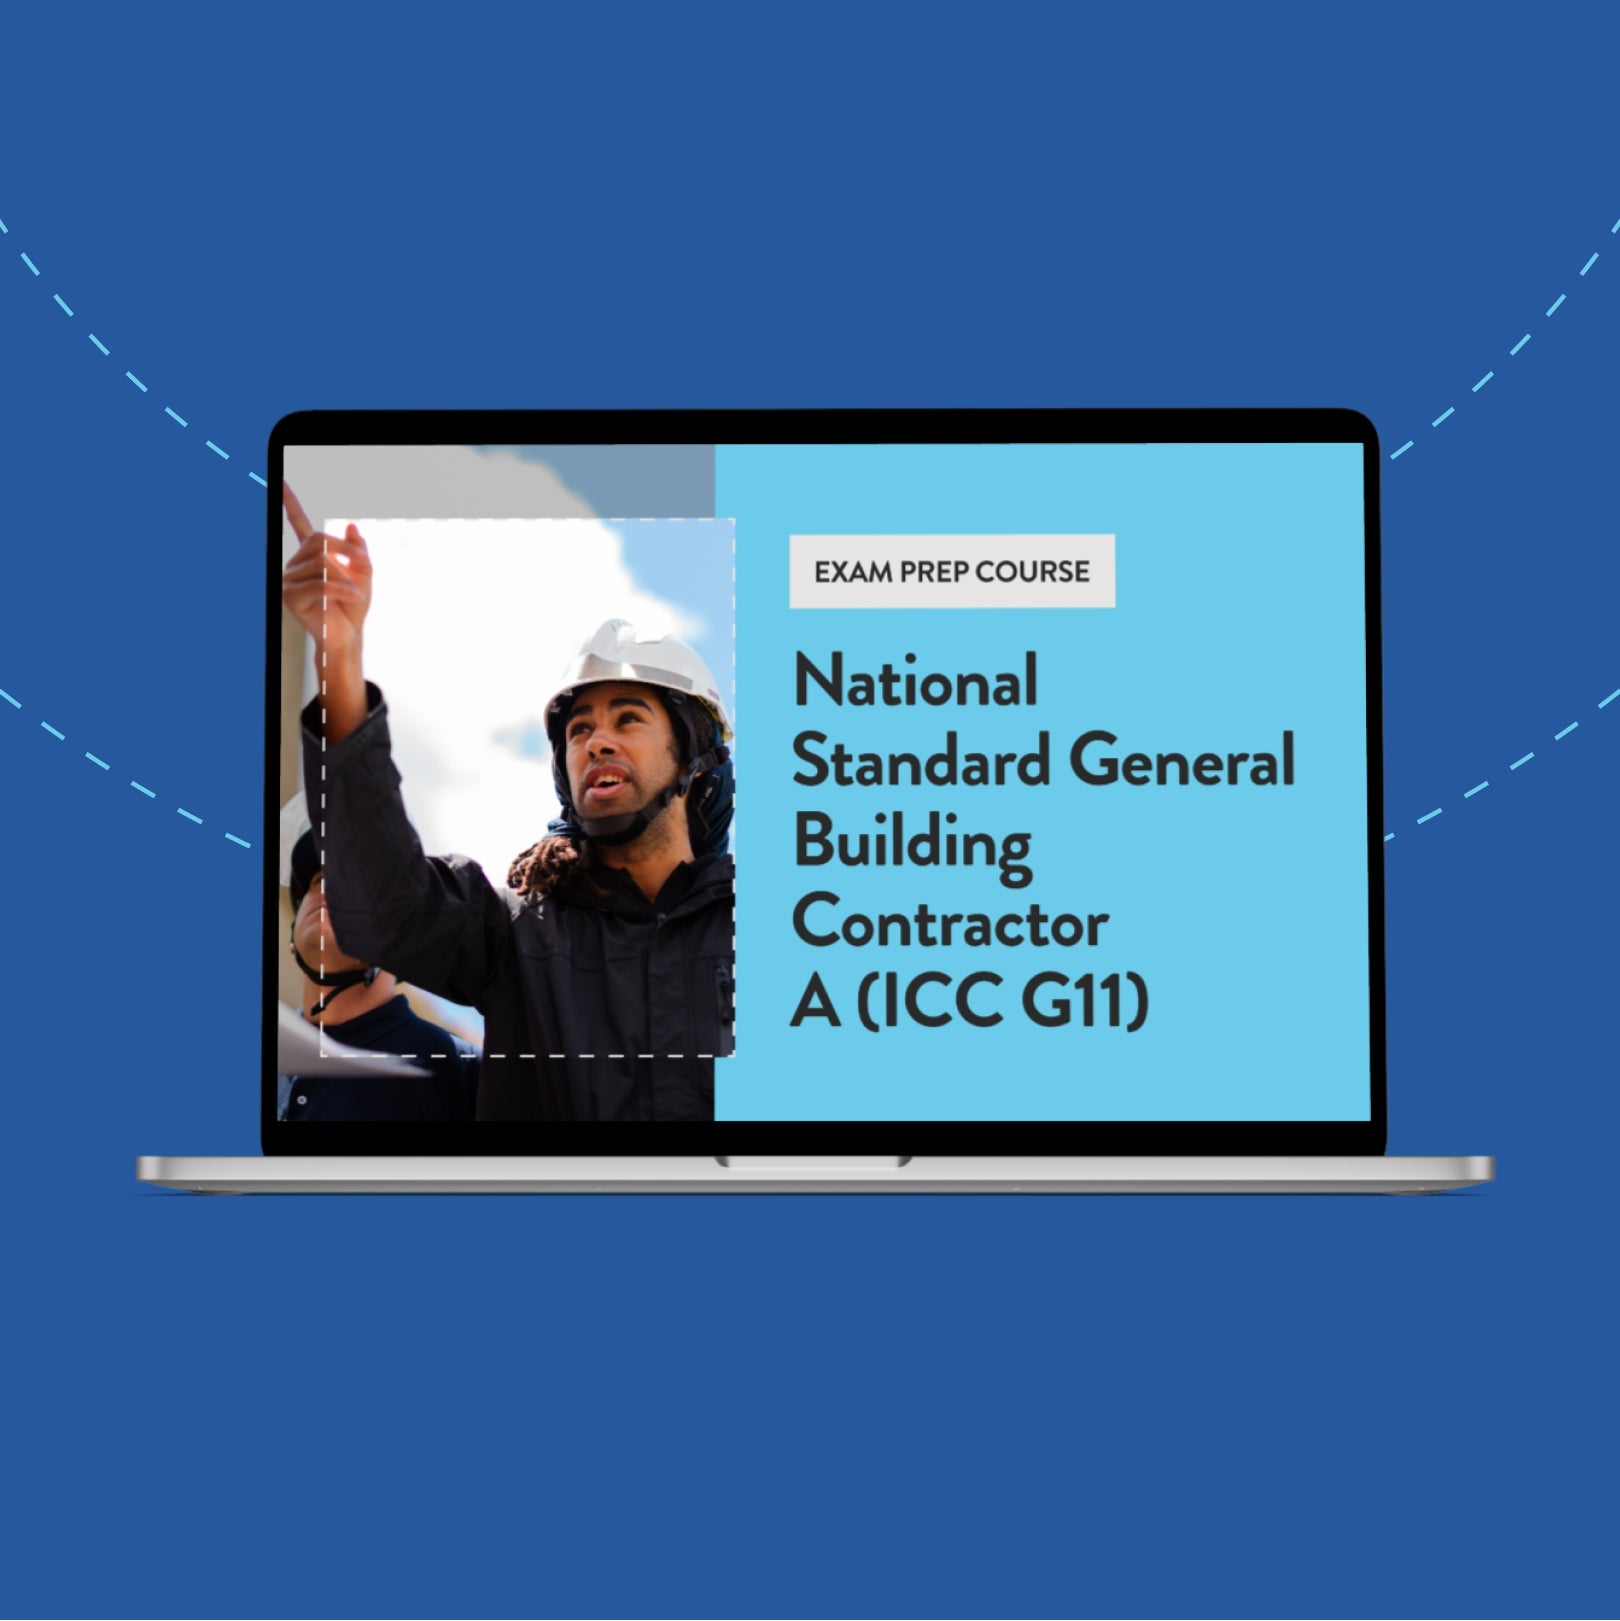 National Standard General Building Contractor A (ICC G11) Exam Prep Course